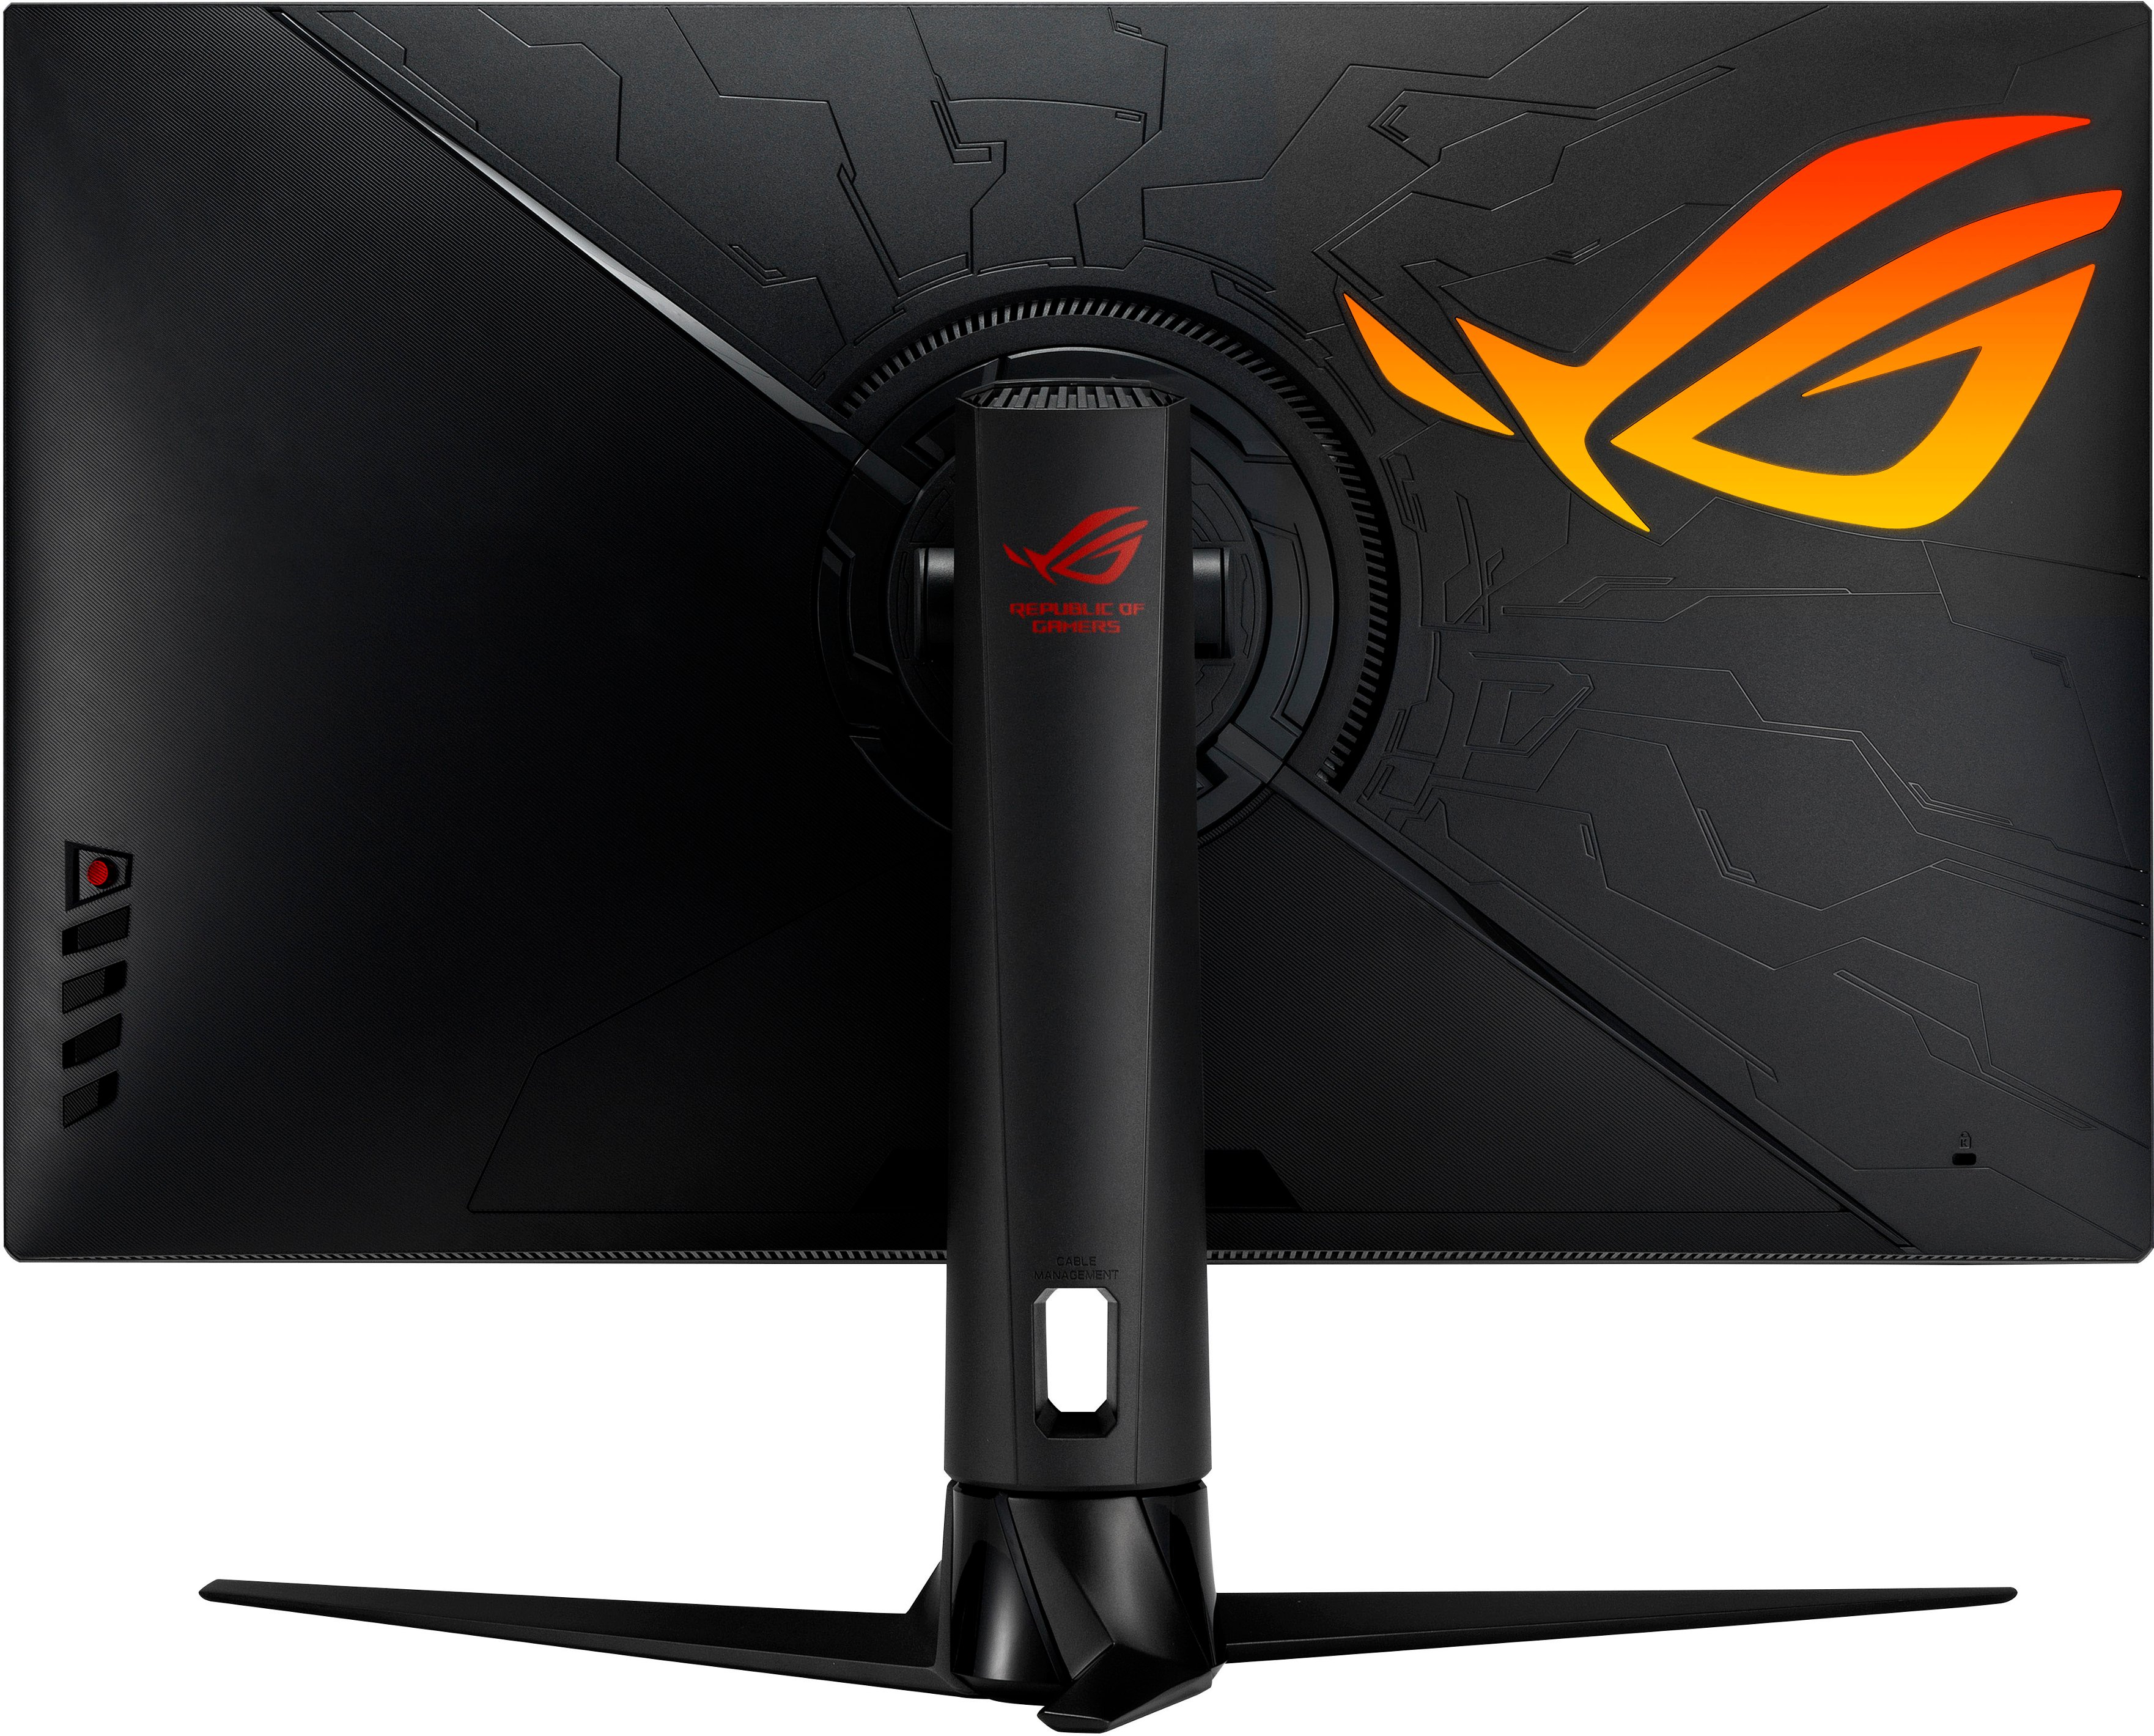 Back View: ASUS - ROG Swift 32” IPS 4K 144Hz HDMI 2.1 1ms G-SYNC Gaming Monitor with HDR (DisplayPort,USB)